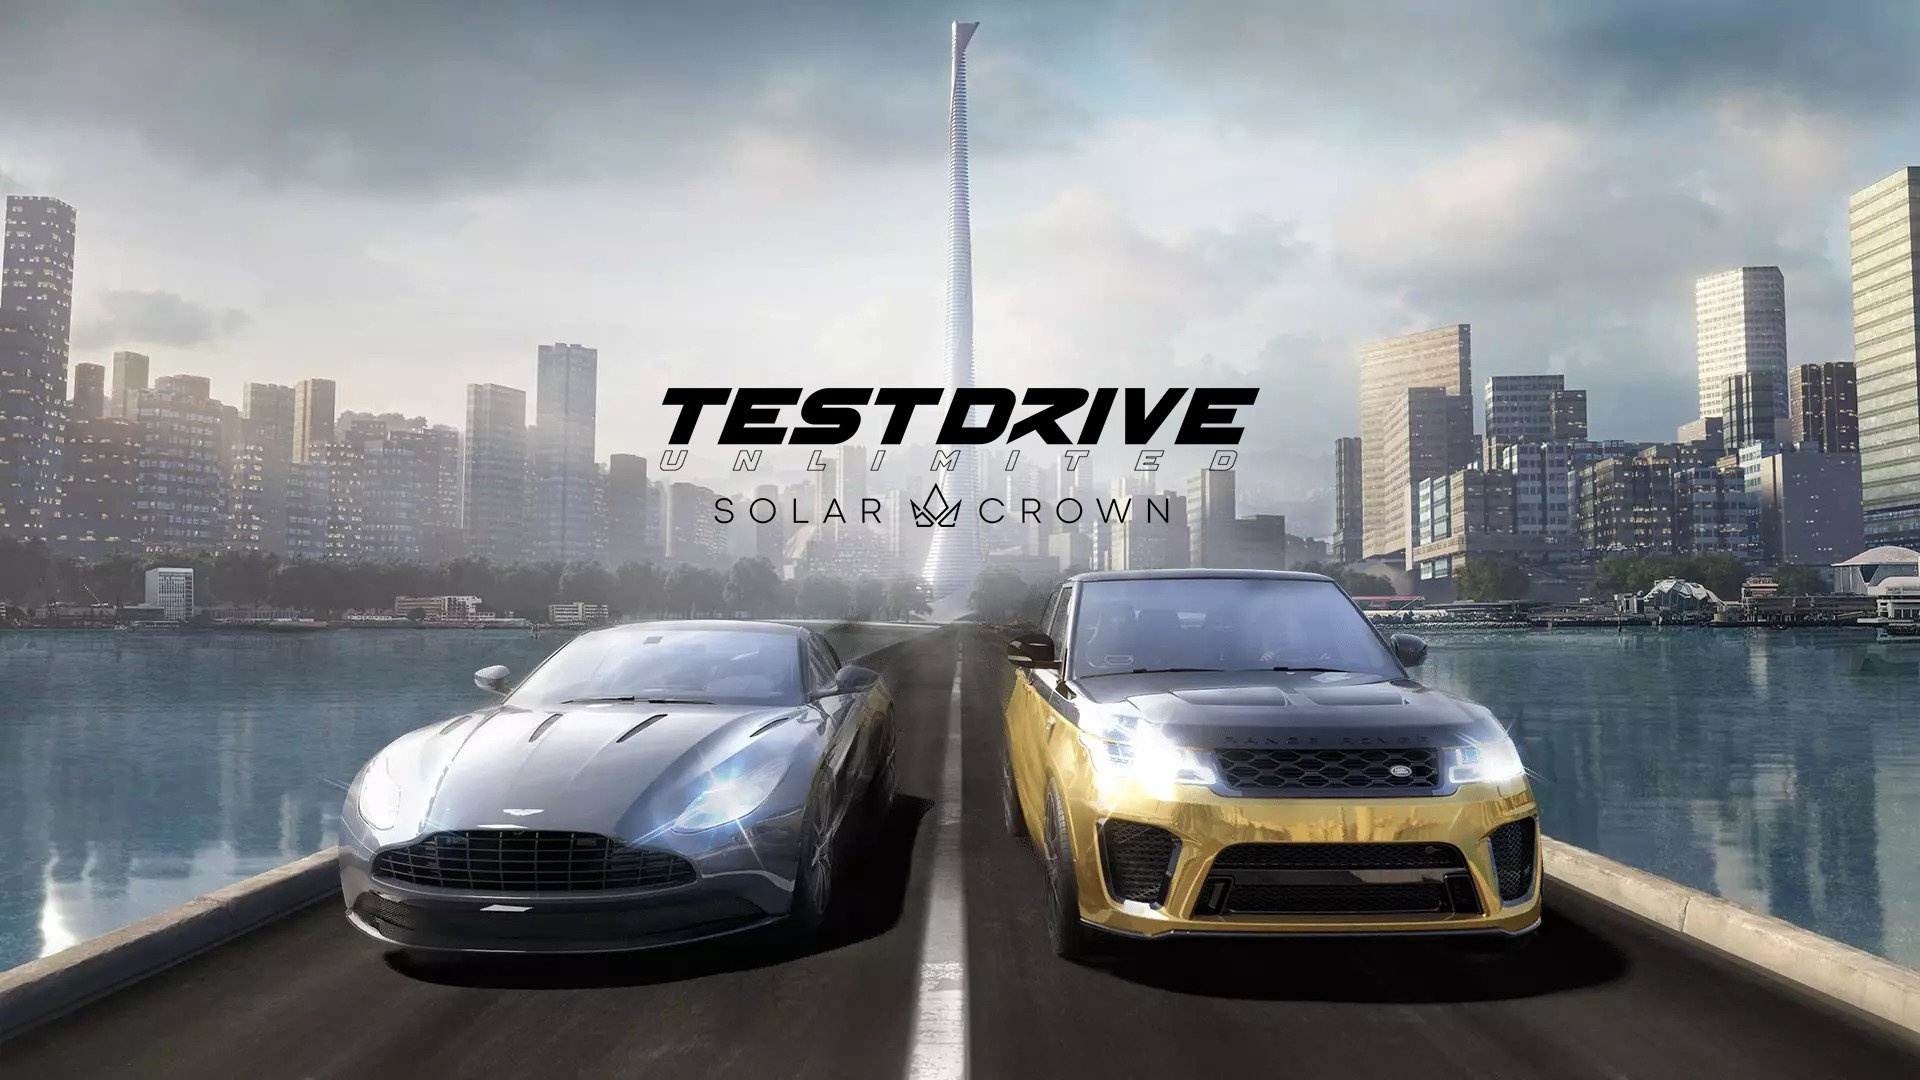 Test Drive Unlimited Solar Crown: In-universe racing competition series featured since 2011. 1920x1080 Full HD Wallpaper.